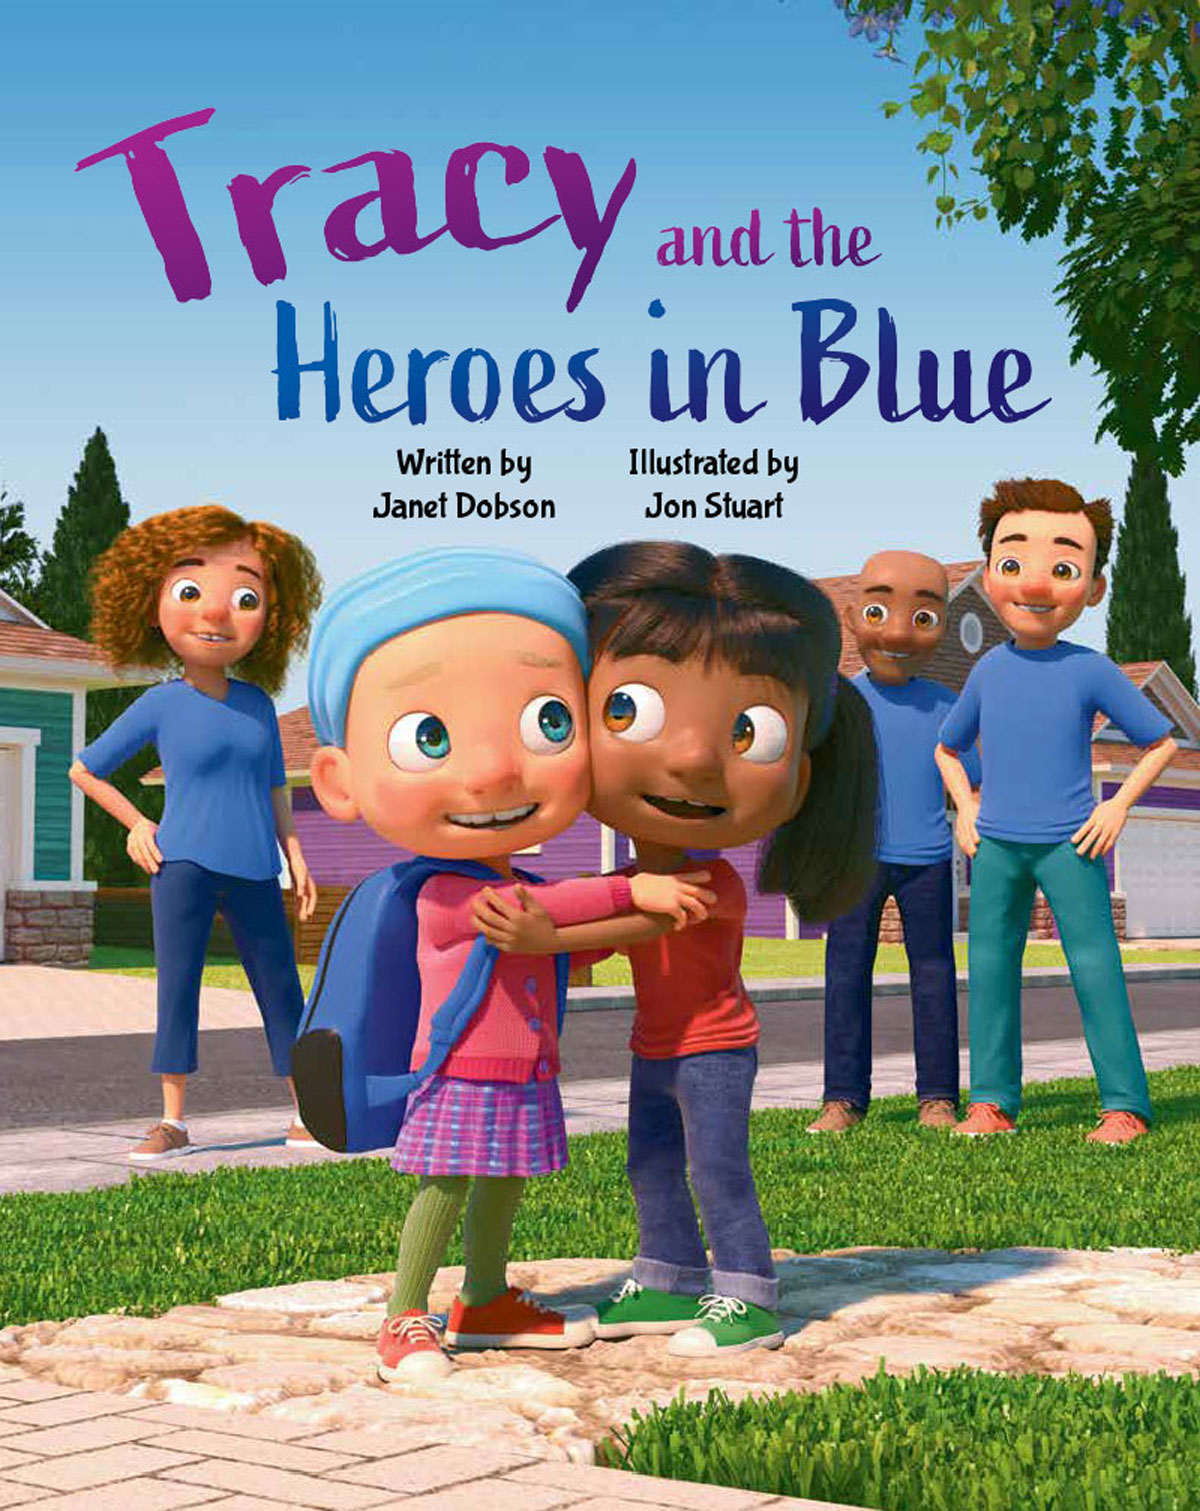 Tracy and the Heroes in Blue by Janet Dobson Book Cover